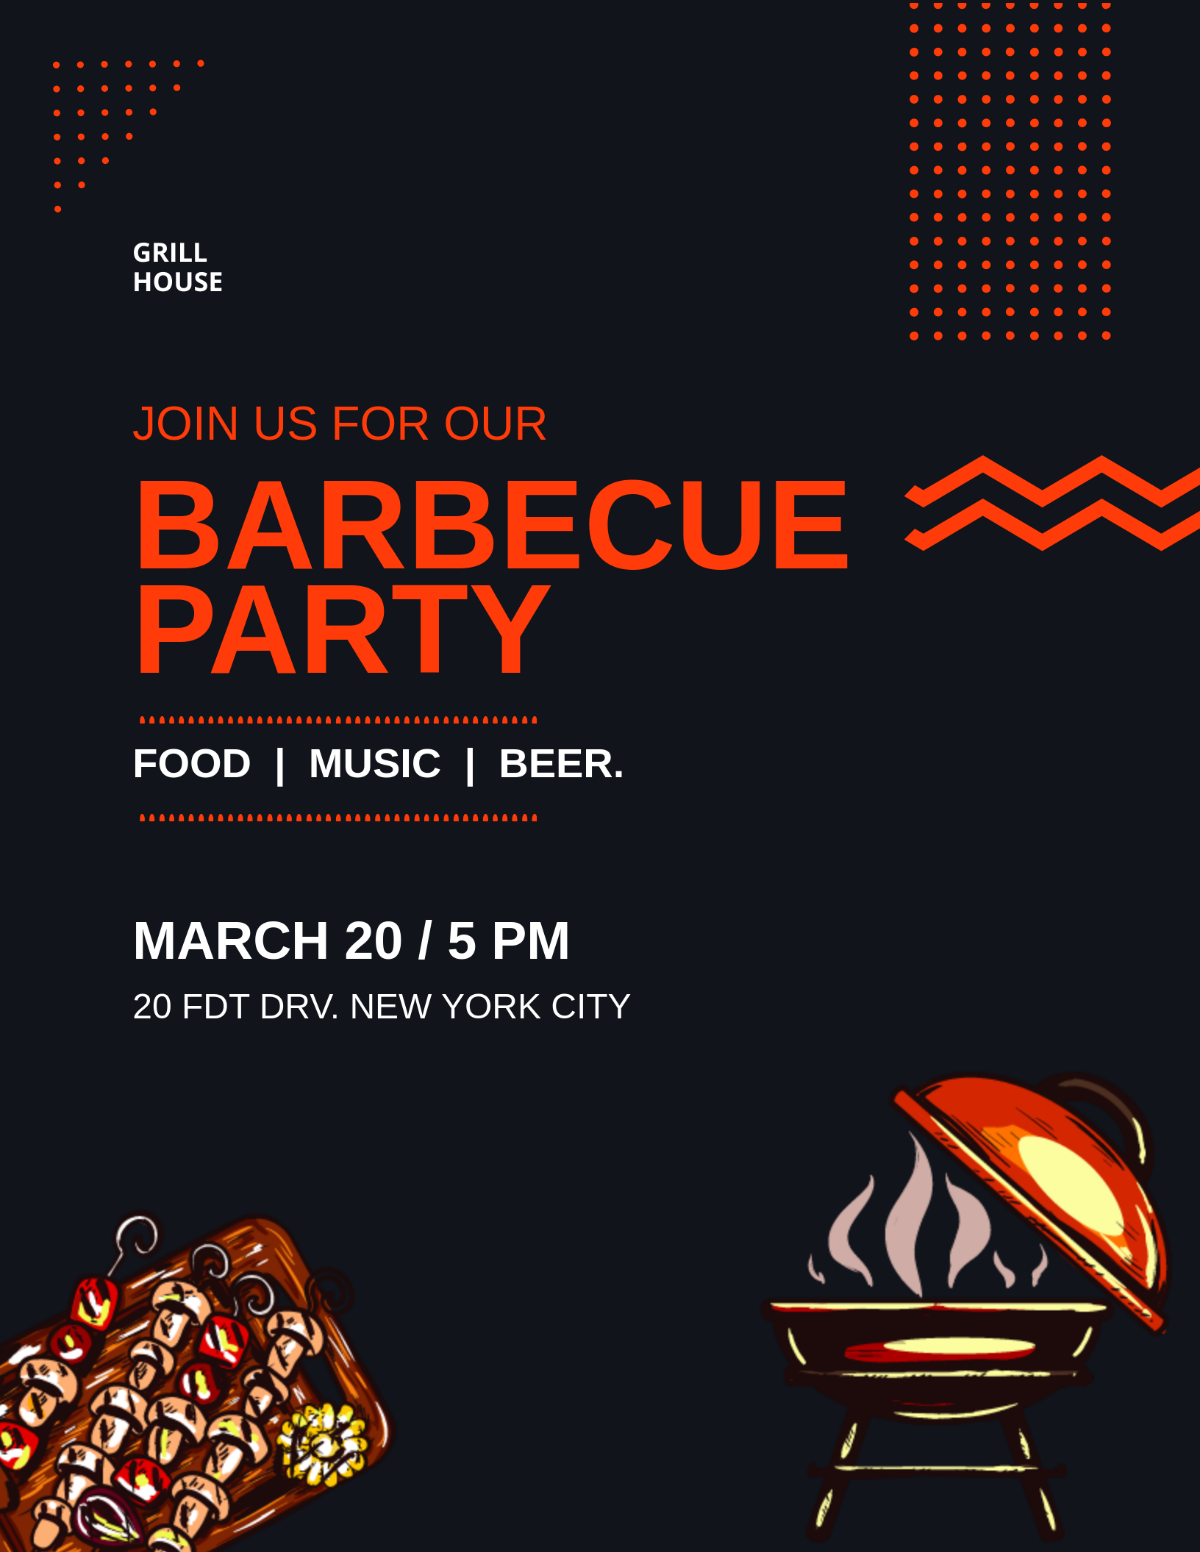 Free Barbecue Grill Restaurant Flyer Template